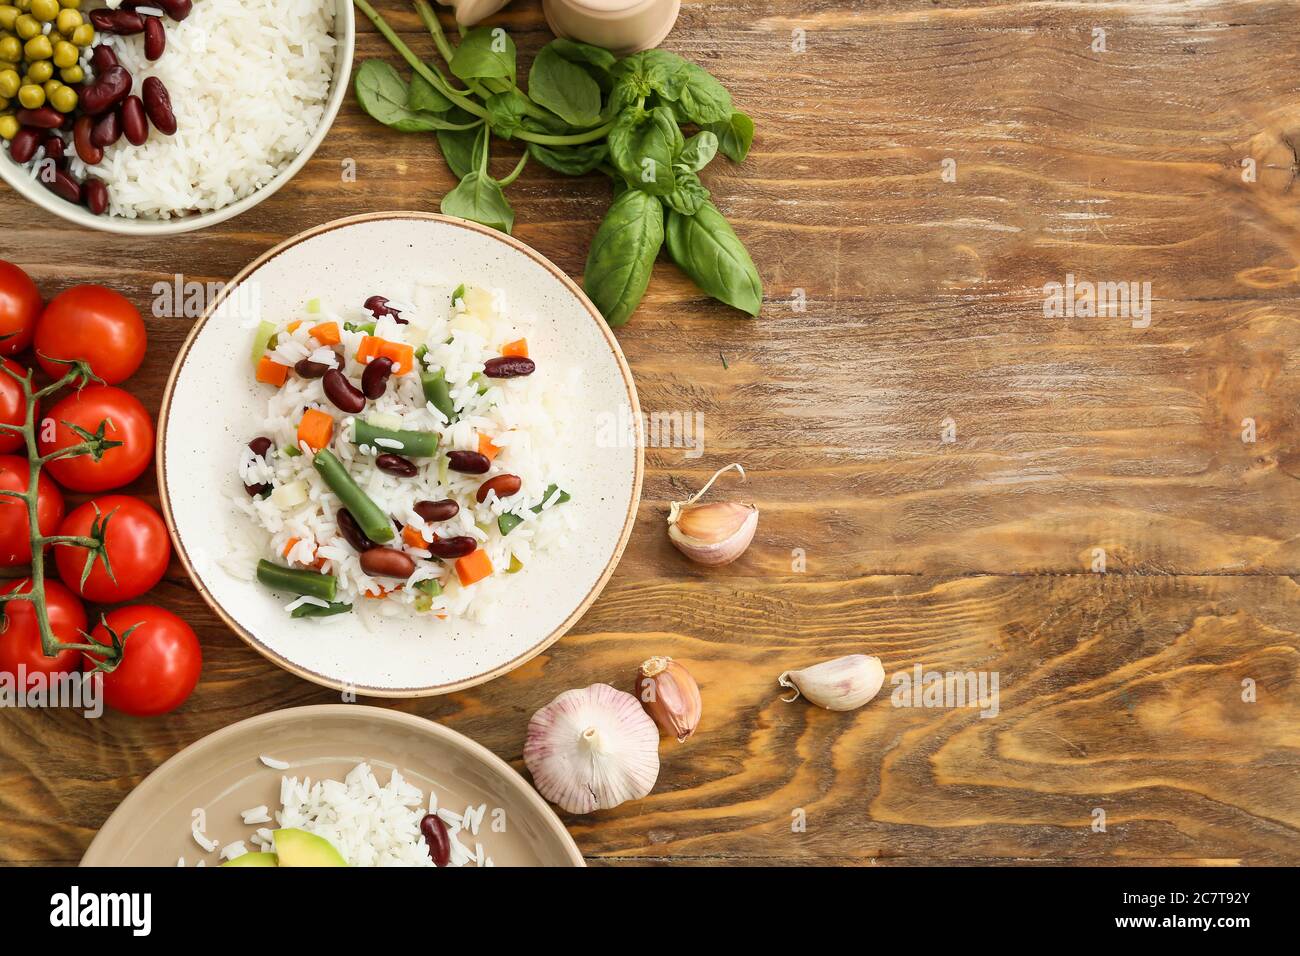 Plates with tasty rice, beans, vegetables on table Stock Photo